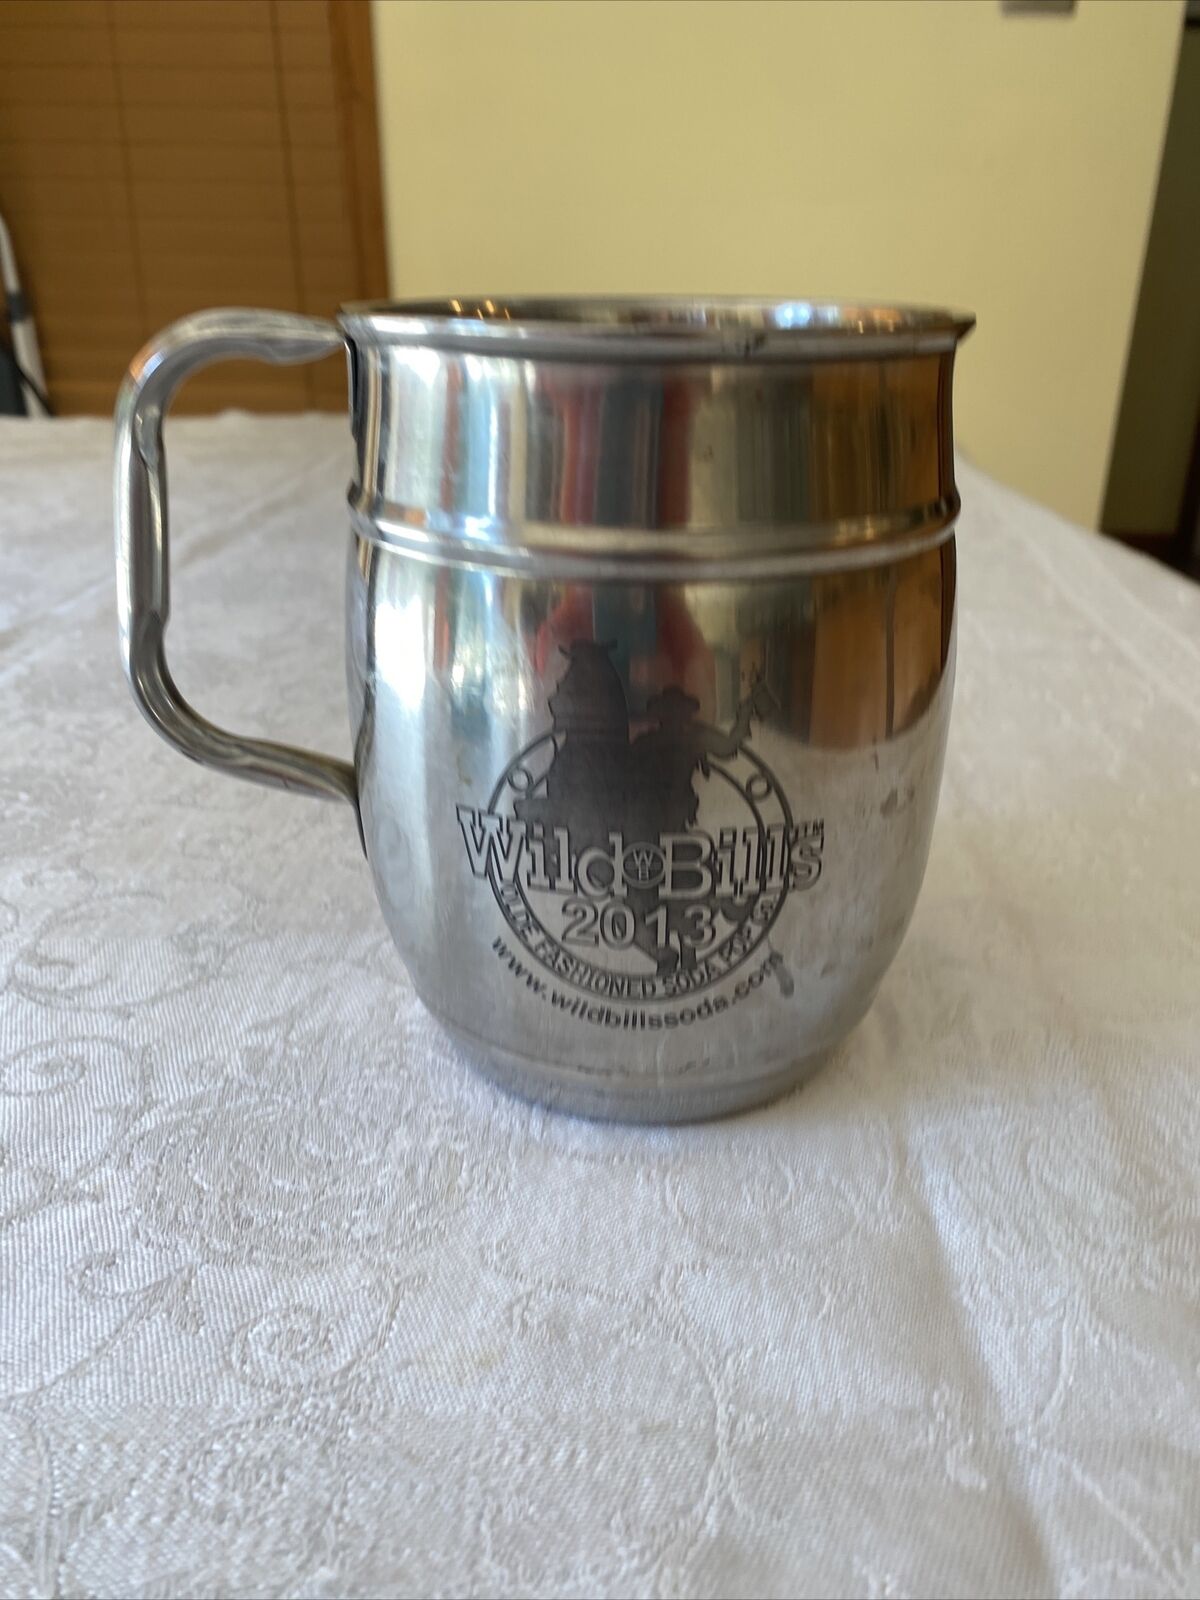 2013 Wild Bill’s Old Fashioned Soda Pop Co. Mountainfest Motor Cycle Rally Mug